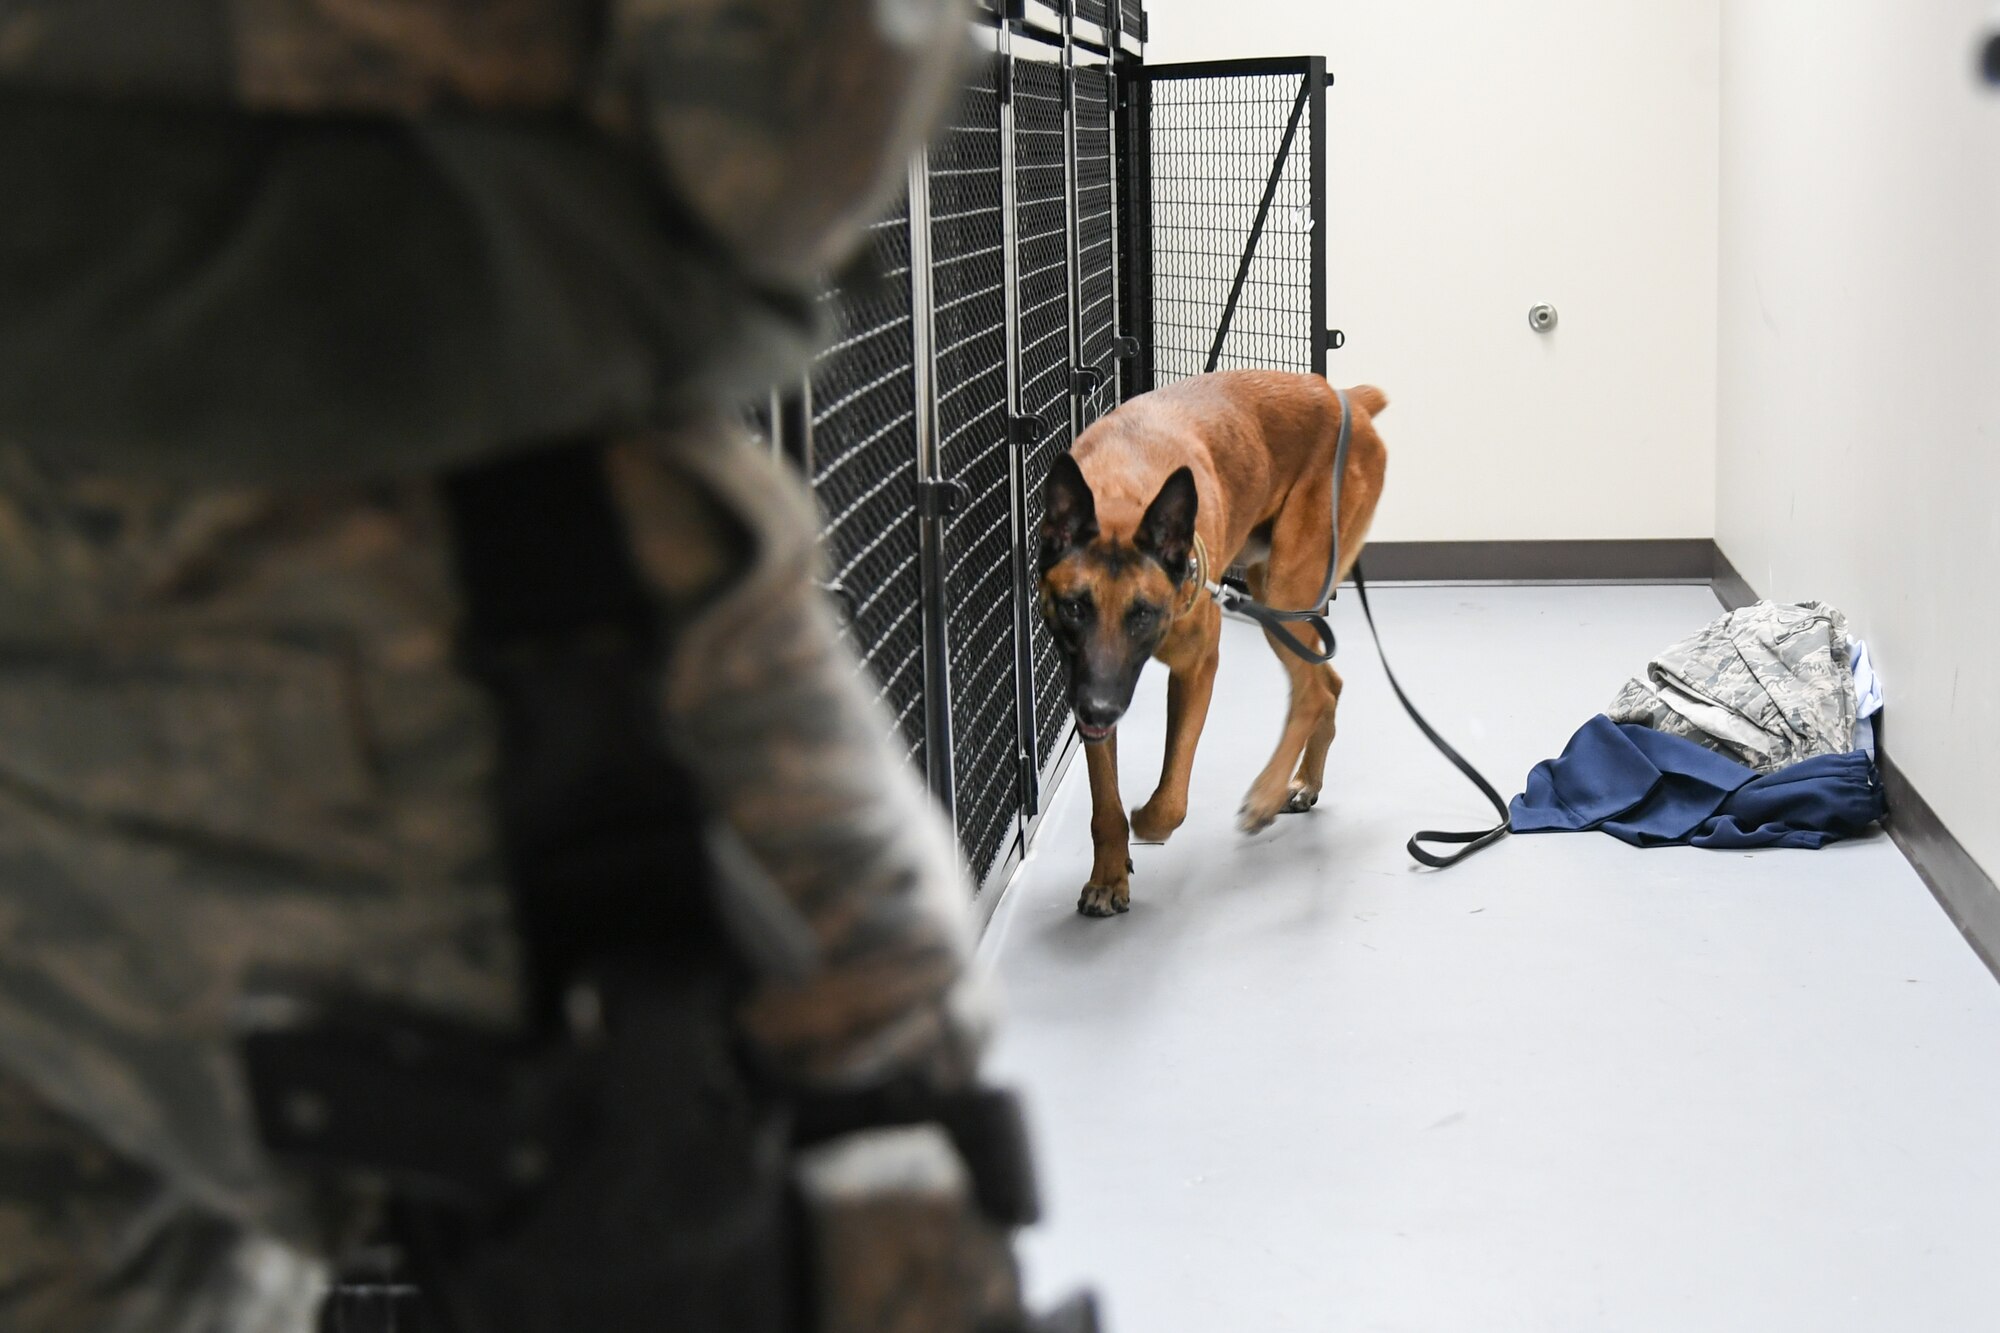 XXuthus, a military working dog assigned to the 75th Security Force Squadron at Hill Air Force Base, Utah, sniffs around a dorm storage unit March 4, 2020.  Staff Sgt. Paul Bryant has been XXuthus's handler for six months. Xxuthus is a single-purpose MWD, trained as an explosive detection dog. (U.S. Air Force photo by Cynthia Griggs)